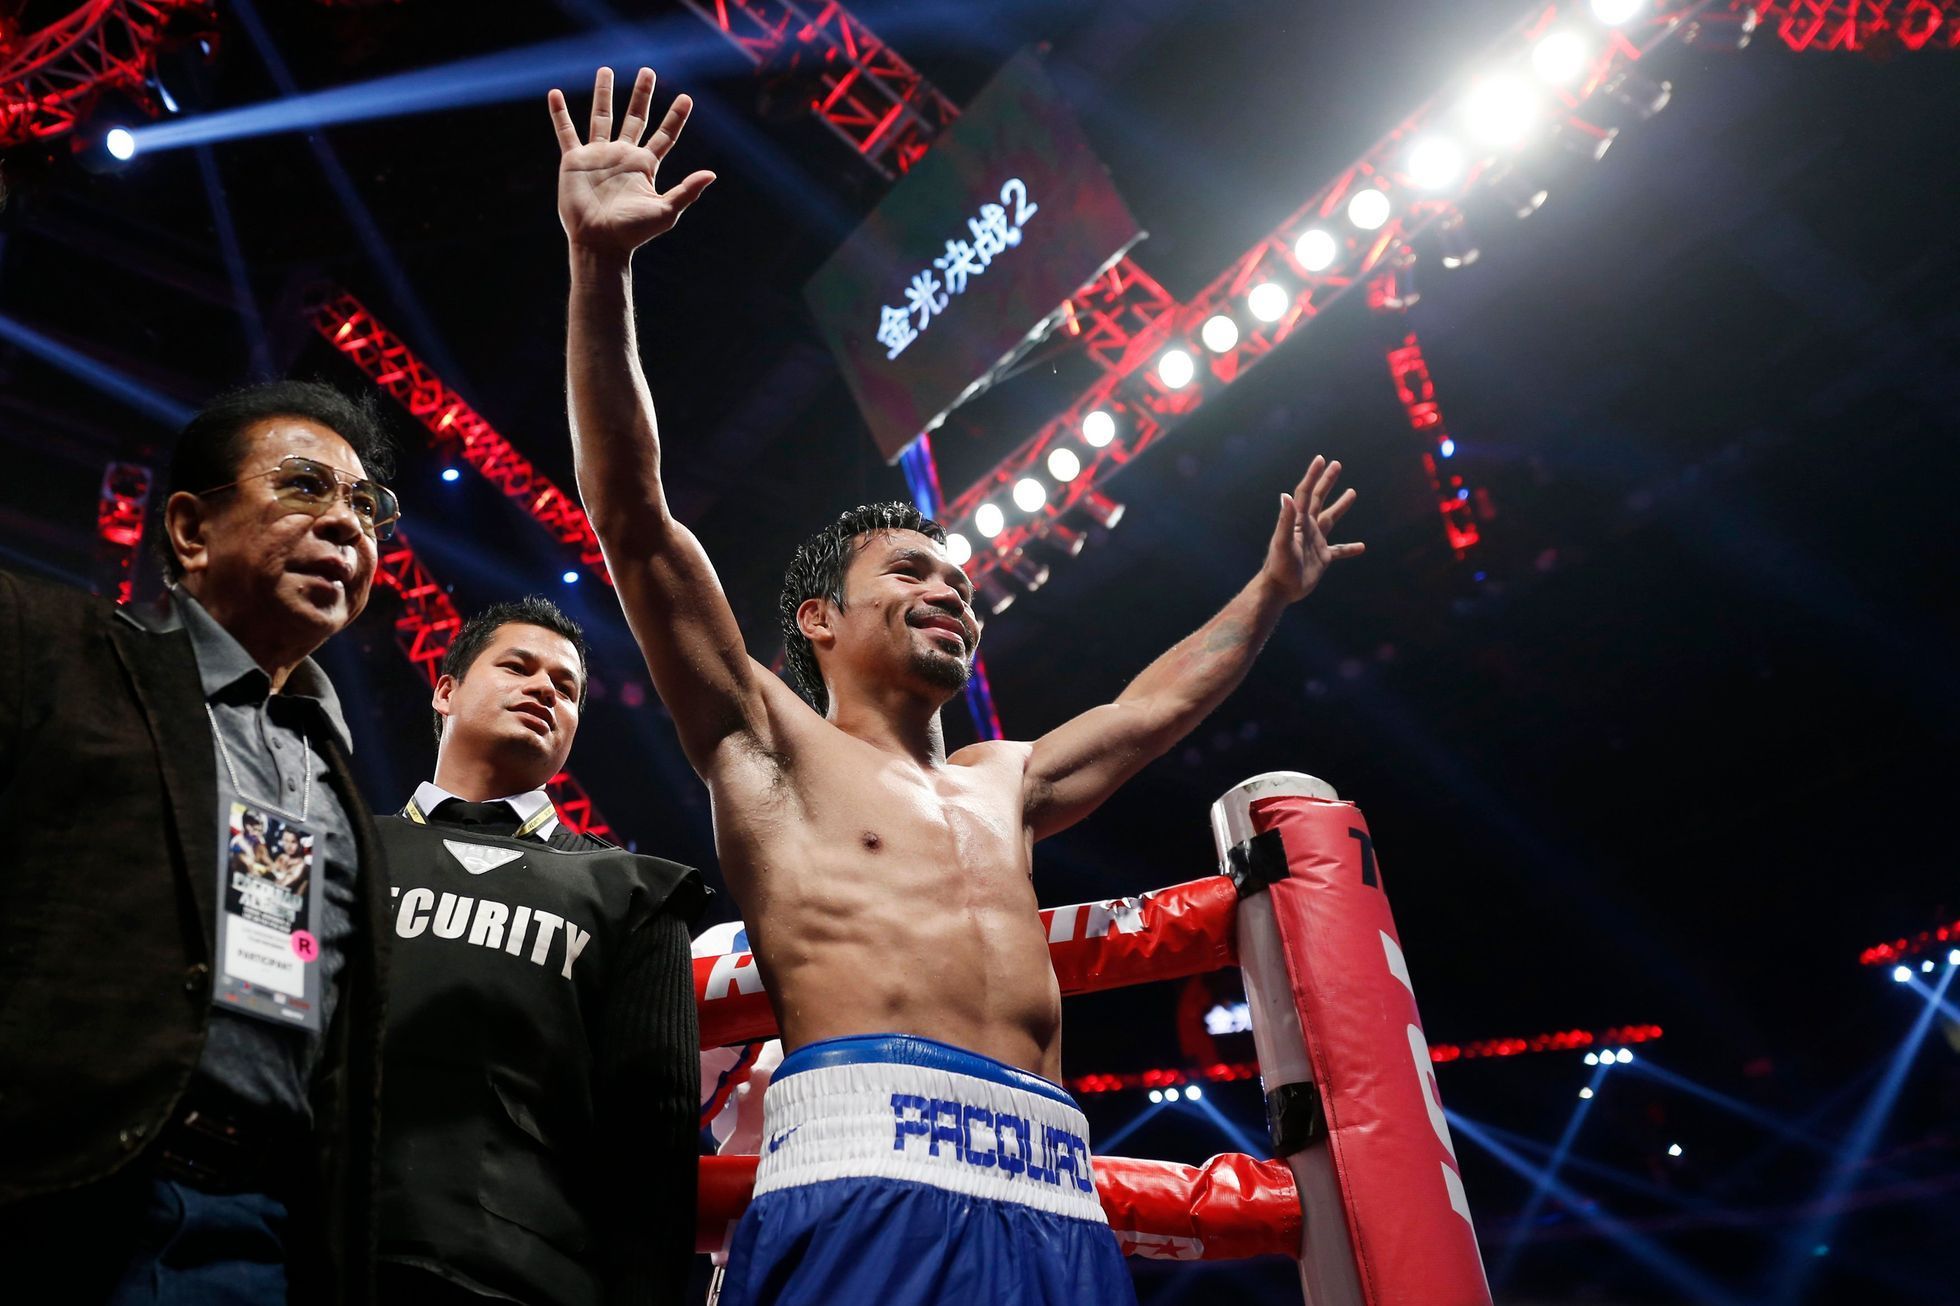 Manny Pacquiao of the Philippines celebrates his victory over Chris Algieri of the U.S. during their World Boxing Organisation 12-round welterweight title fight in Macau